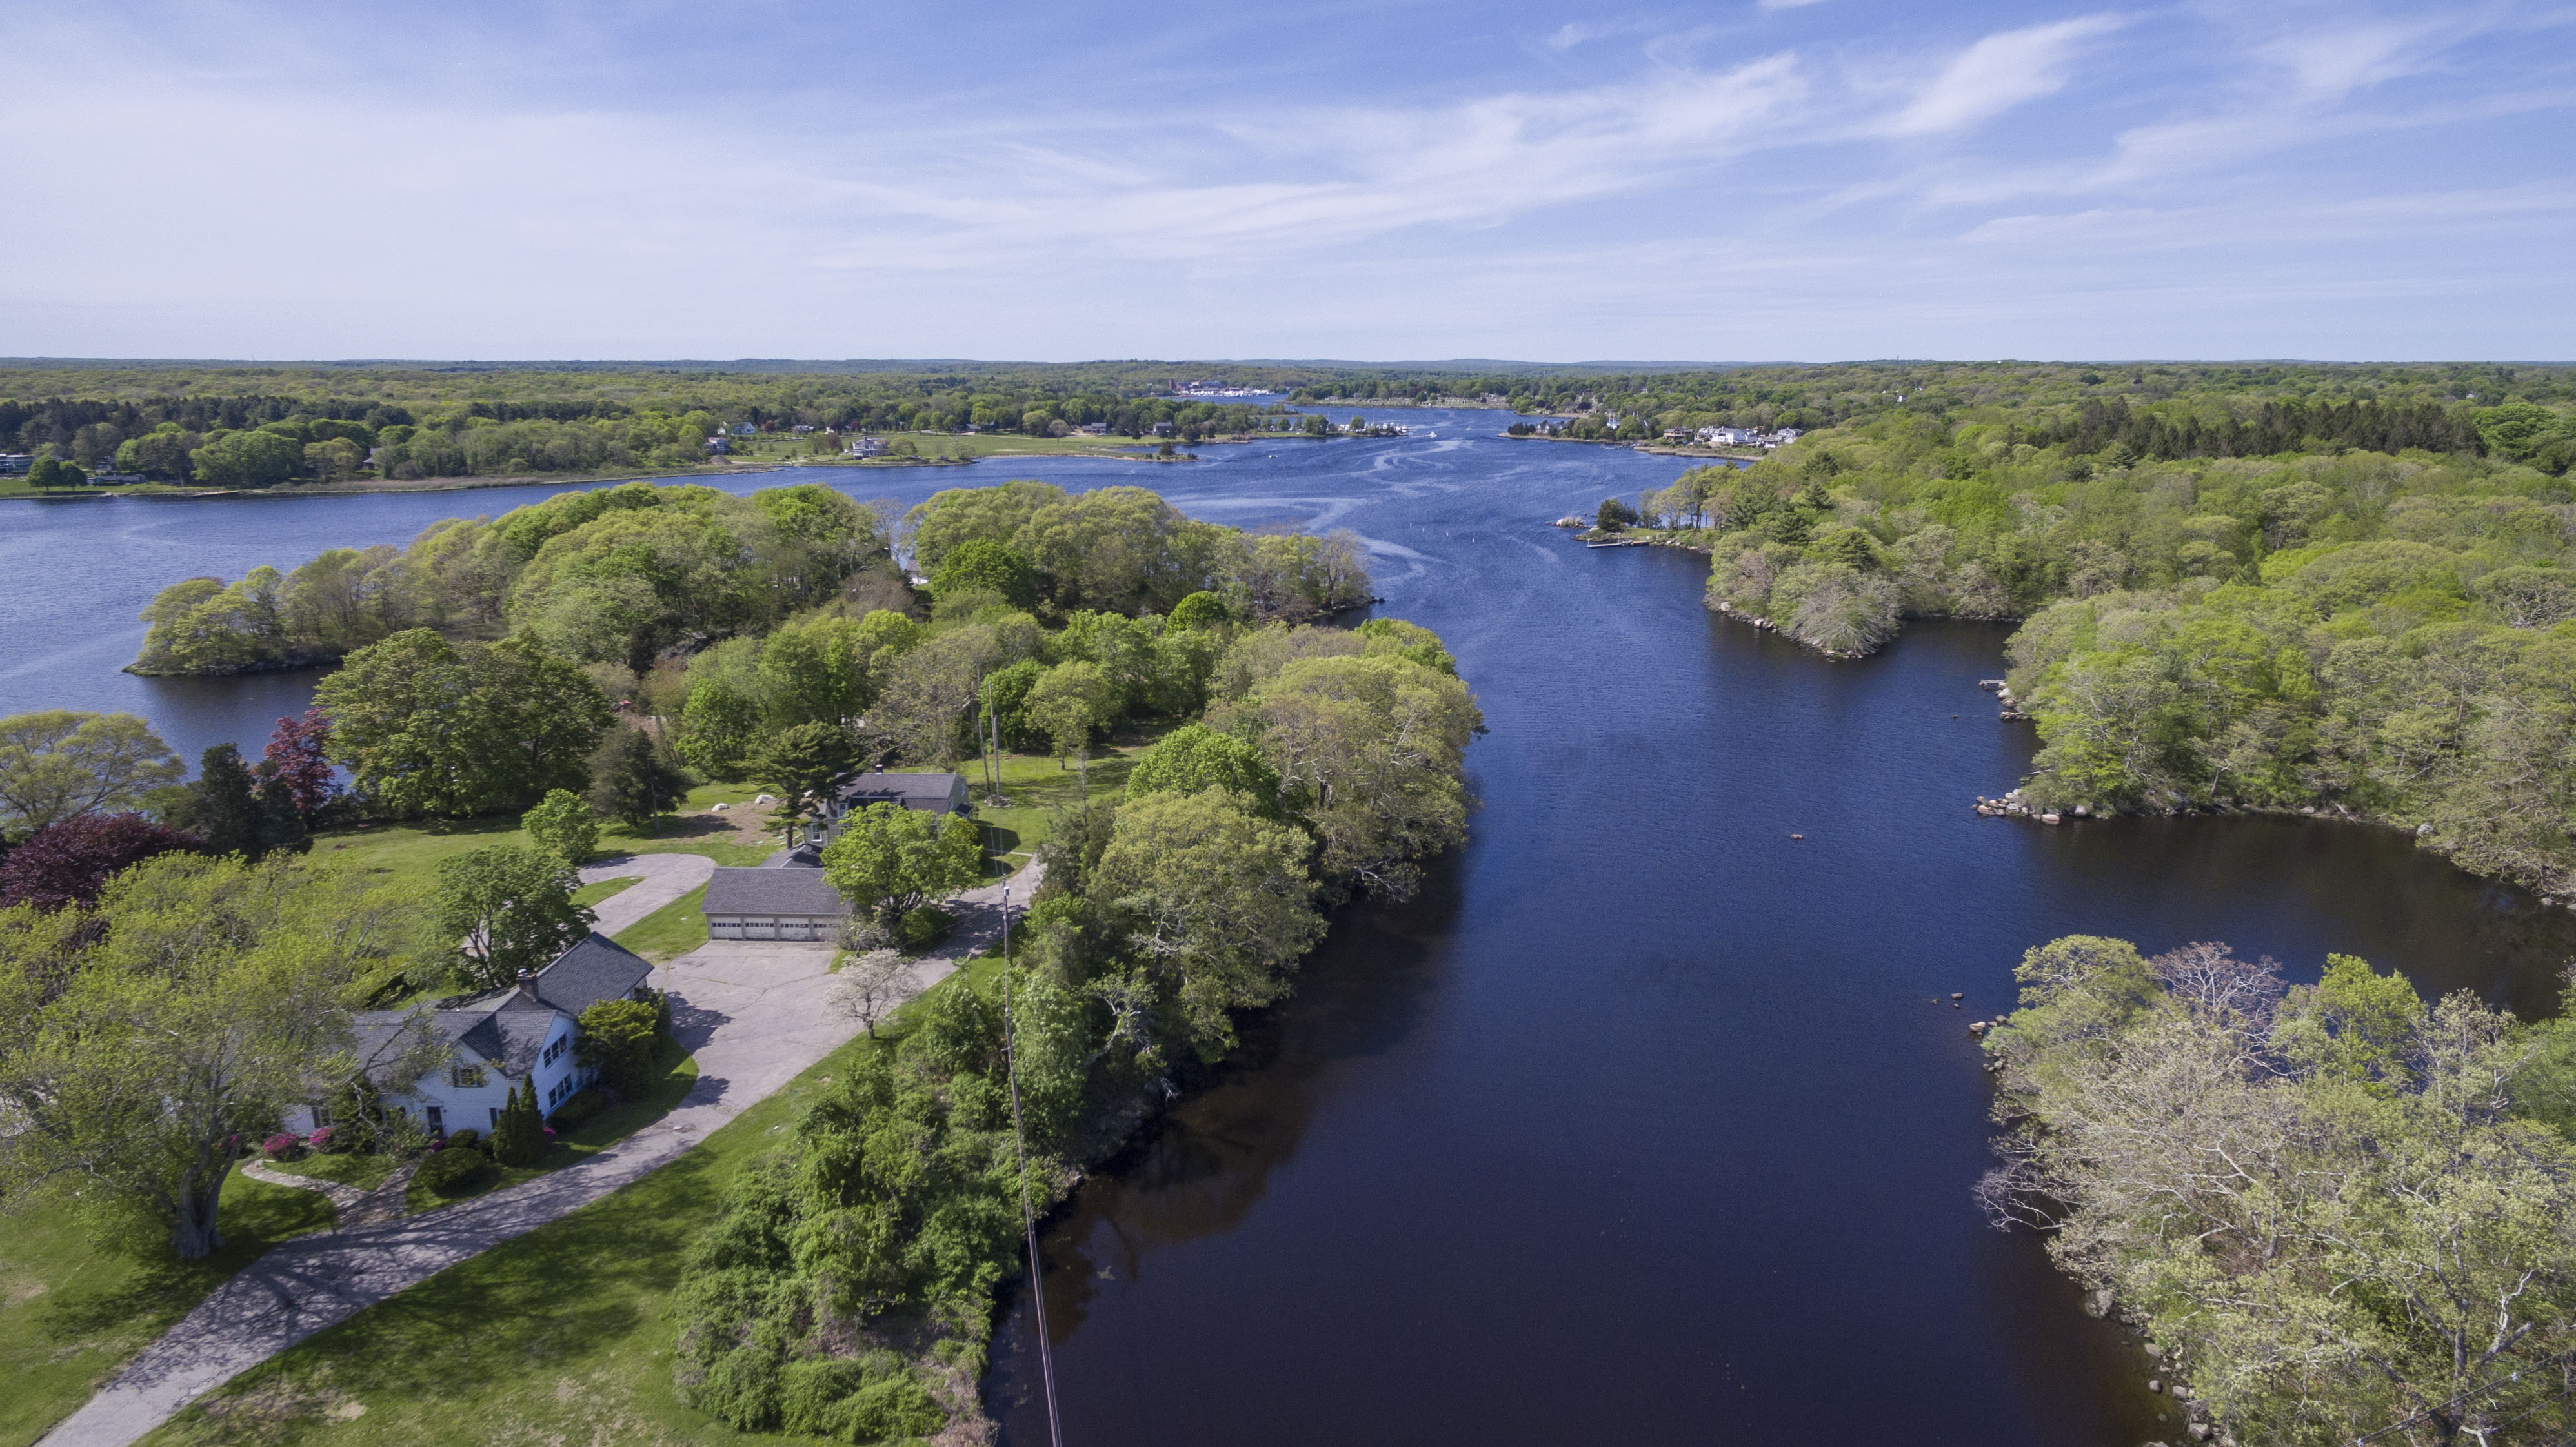 Residential Compound On Pawcatuck River Sells For $2.5 Million